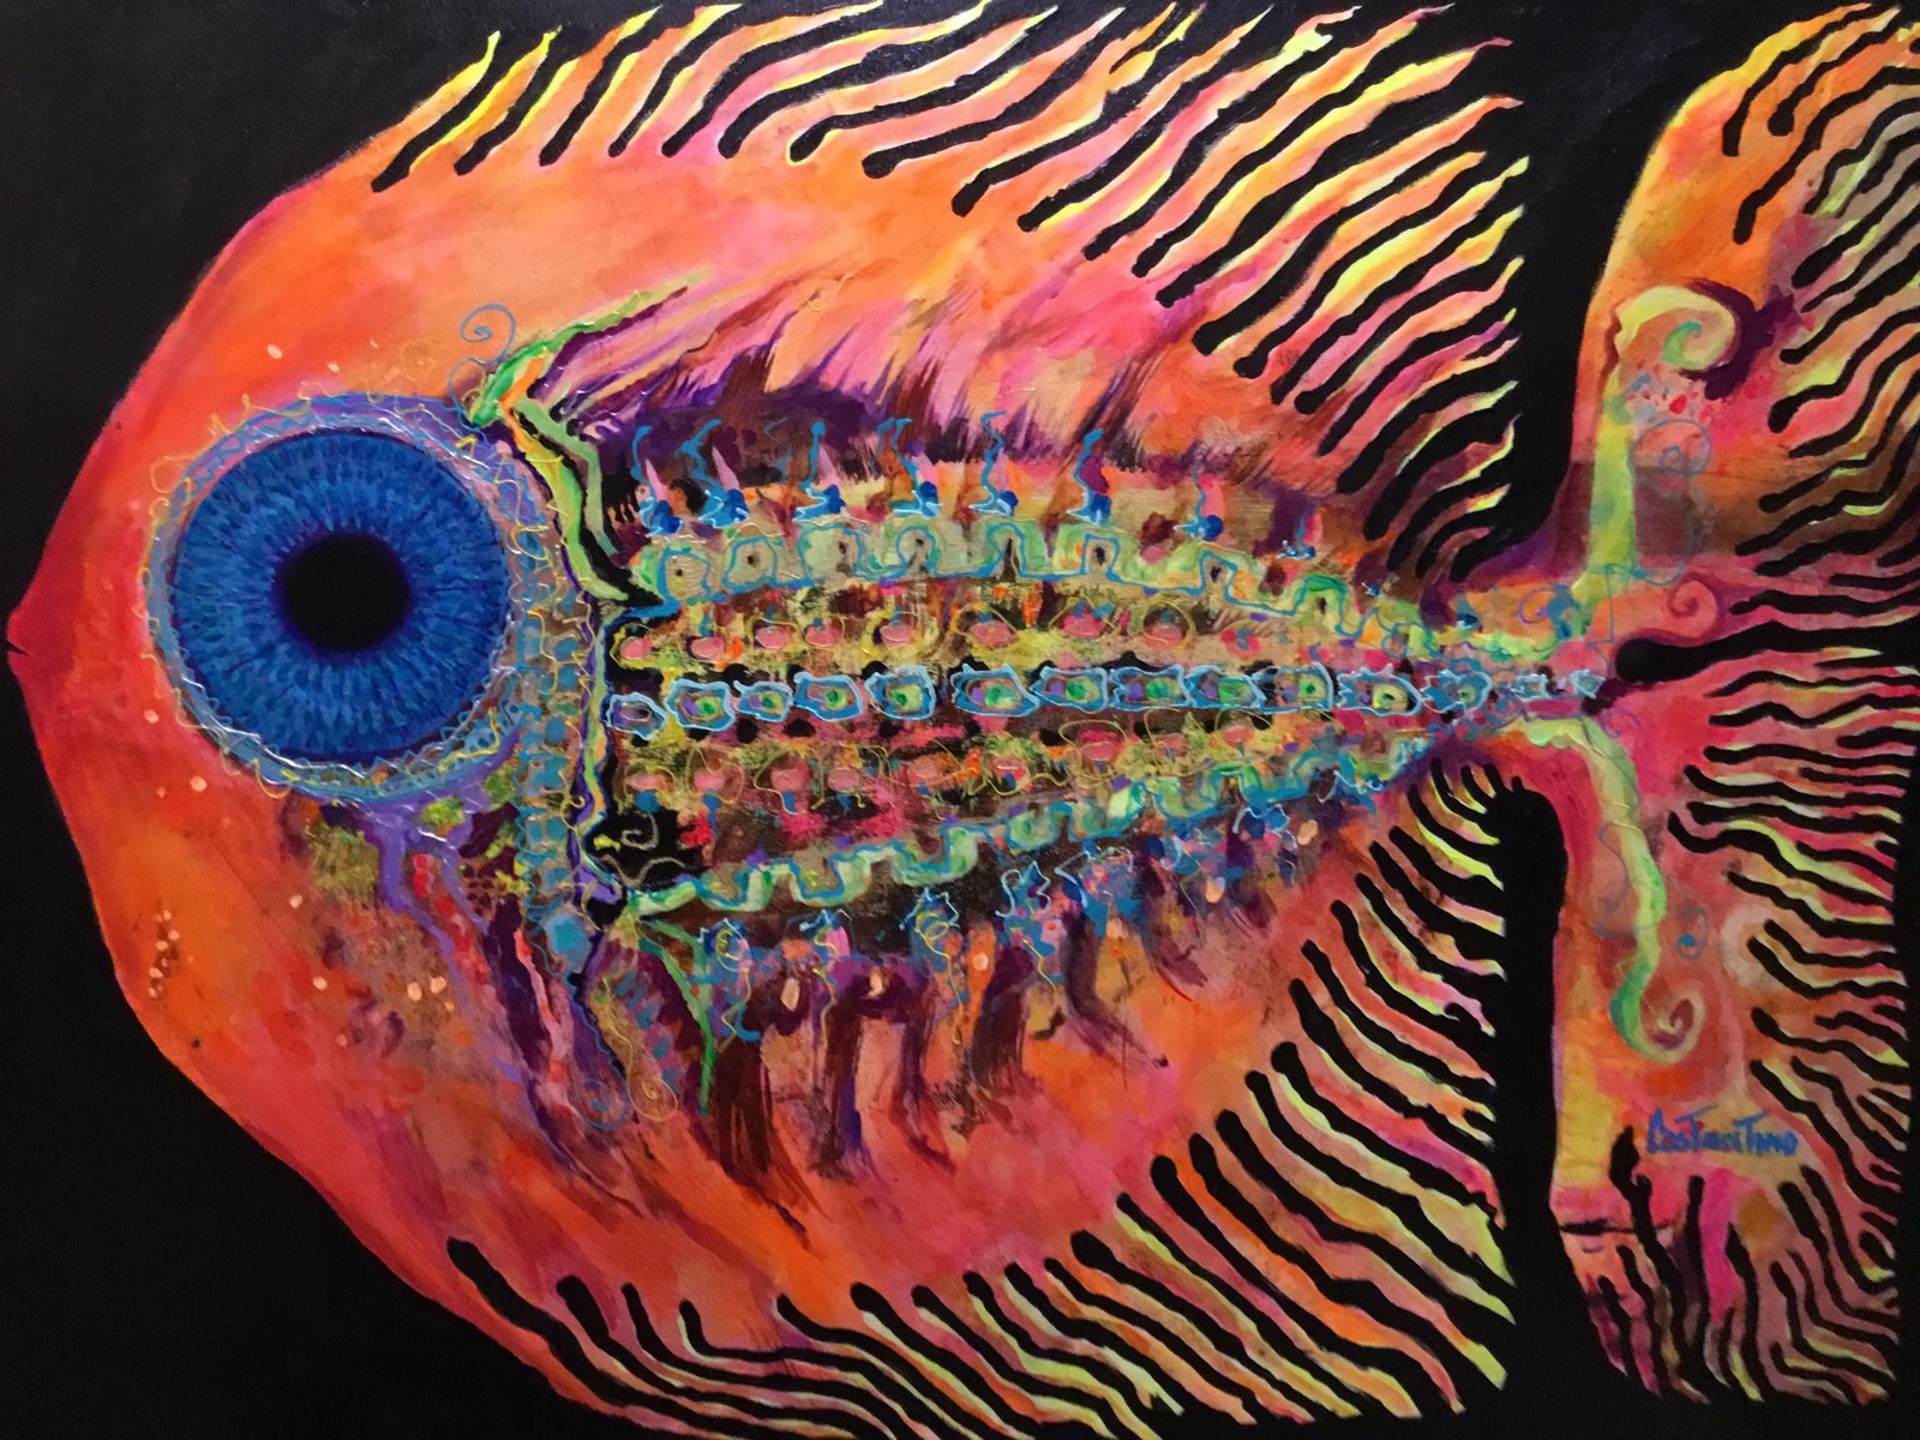 Penelope, A Lahaina Fish by Augustine Costantino